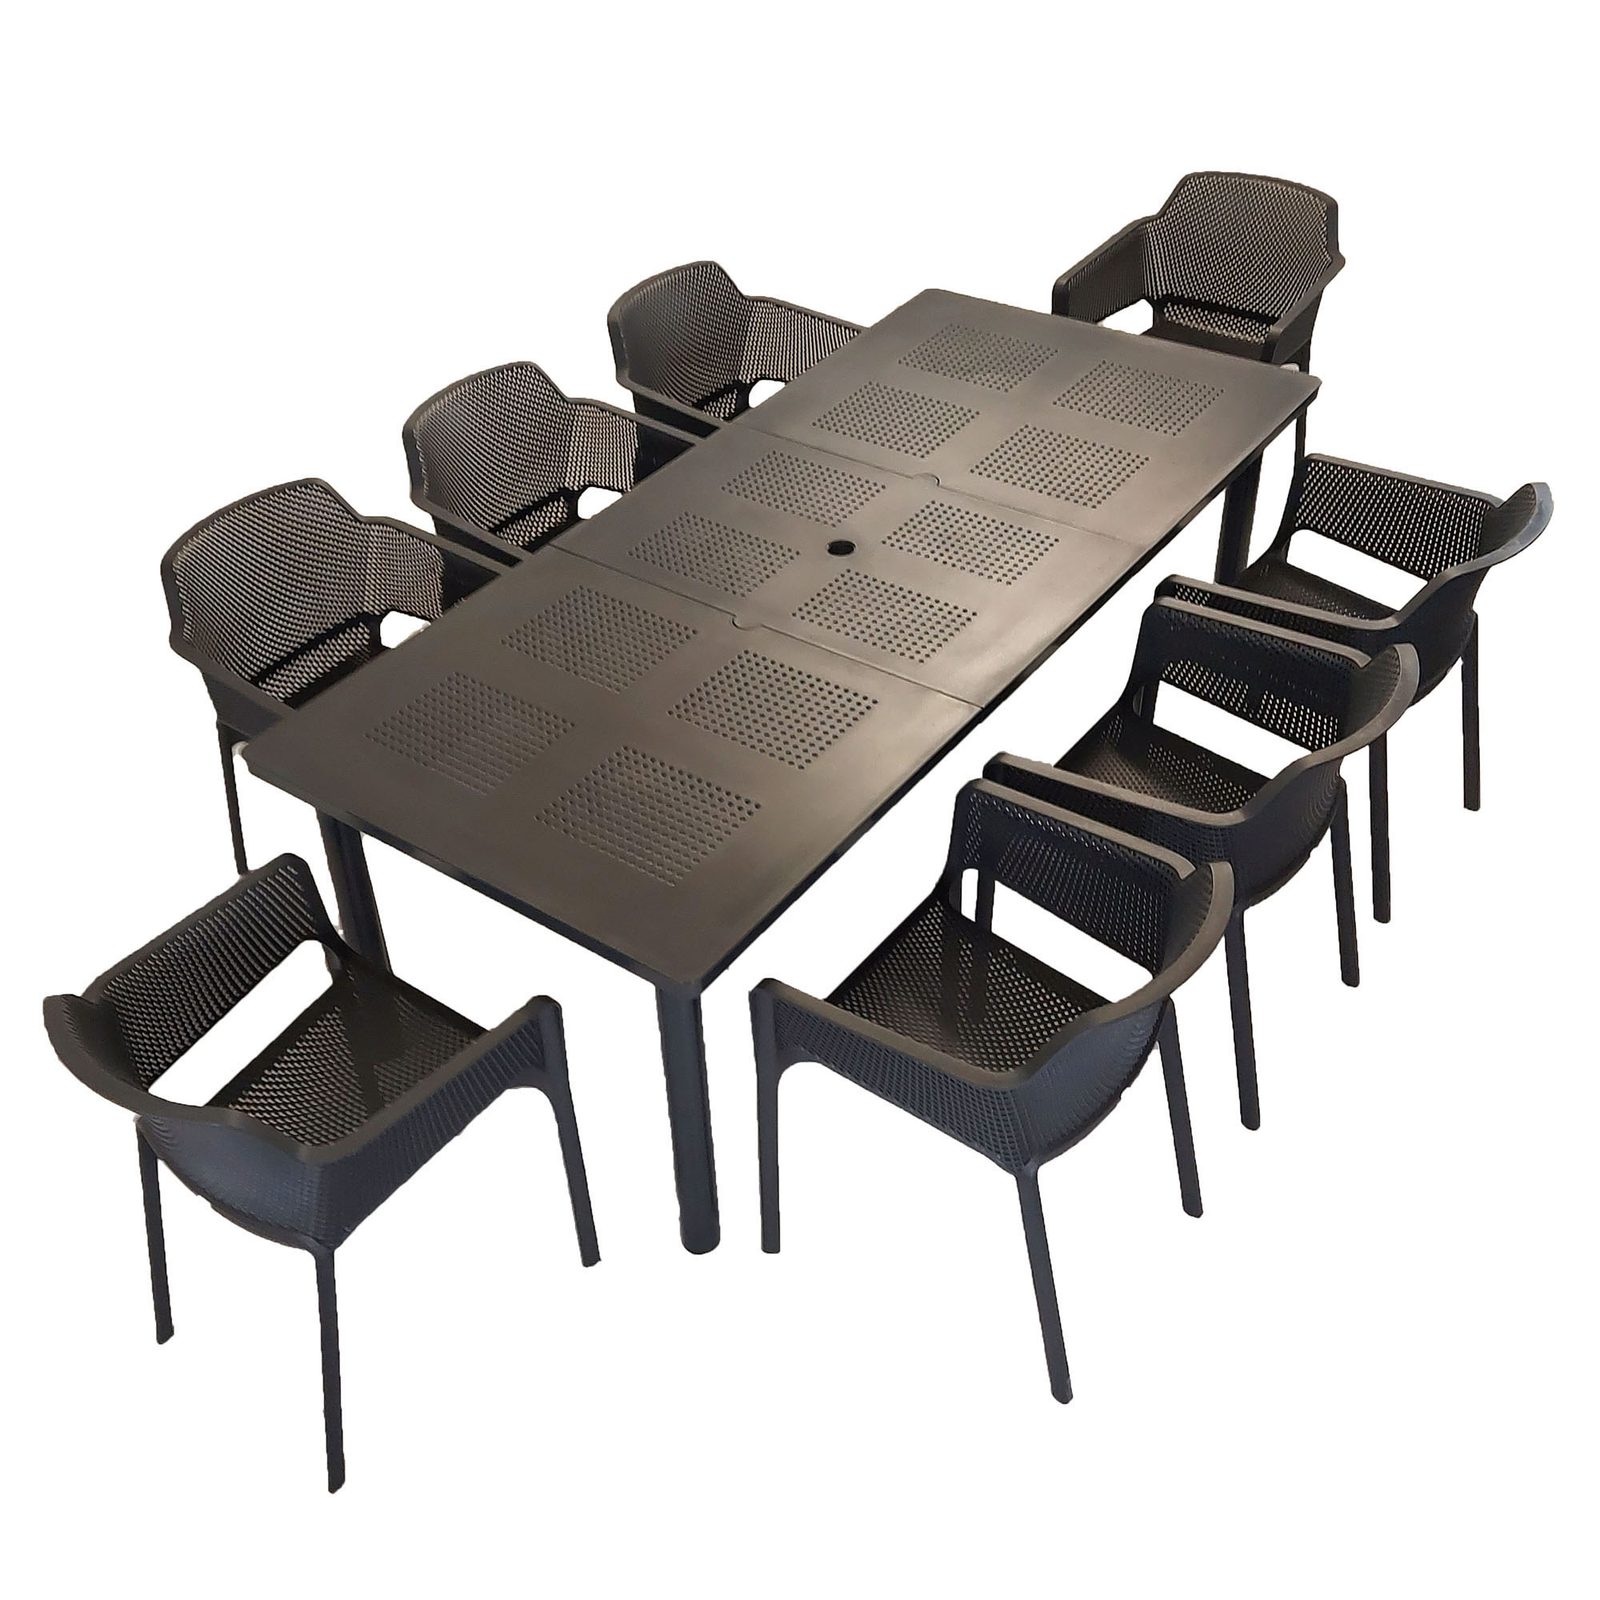 Nardi Libeccio Extending  Dining Table with 8 Net Chairs in Anthracite Garden Dining Set Dining Sets Nardi   